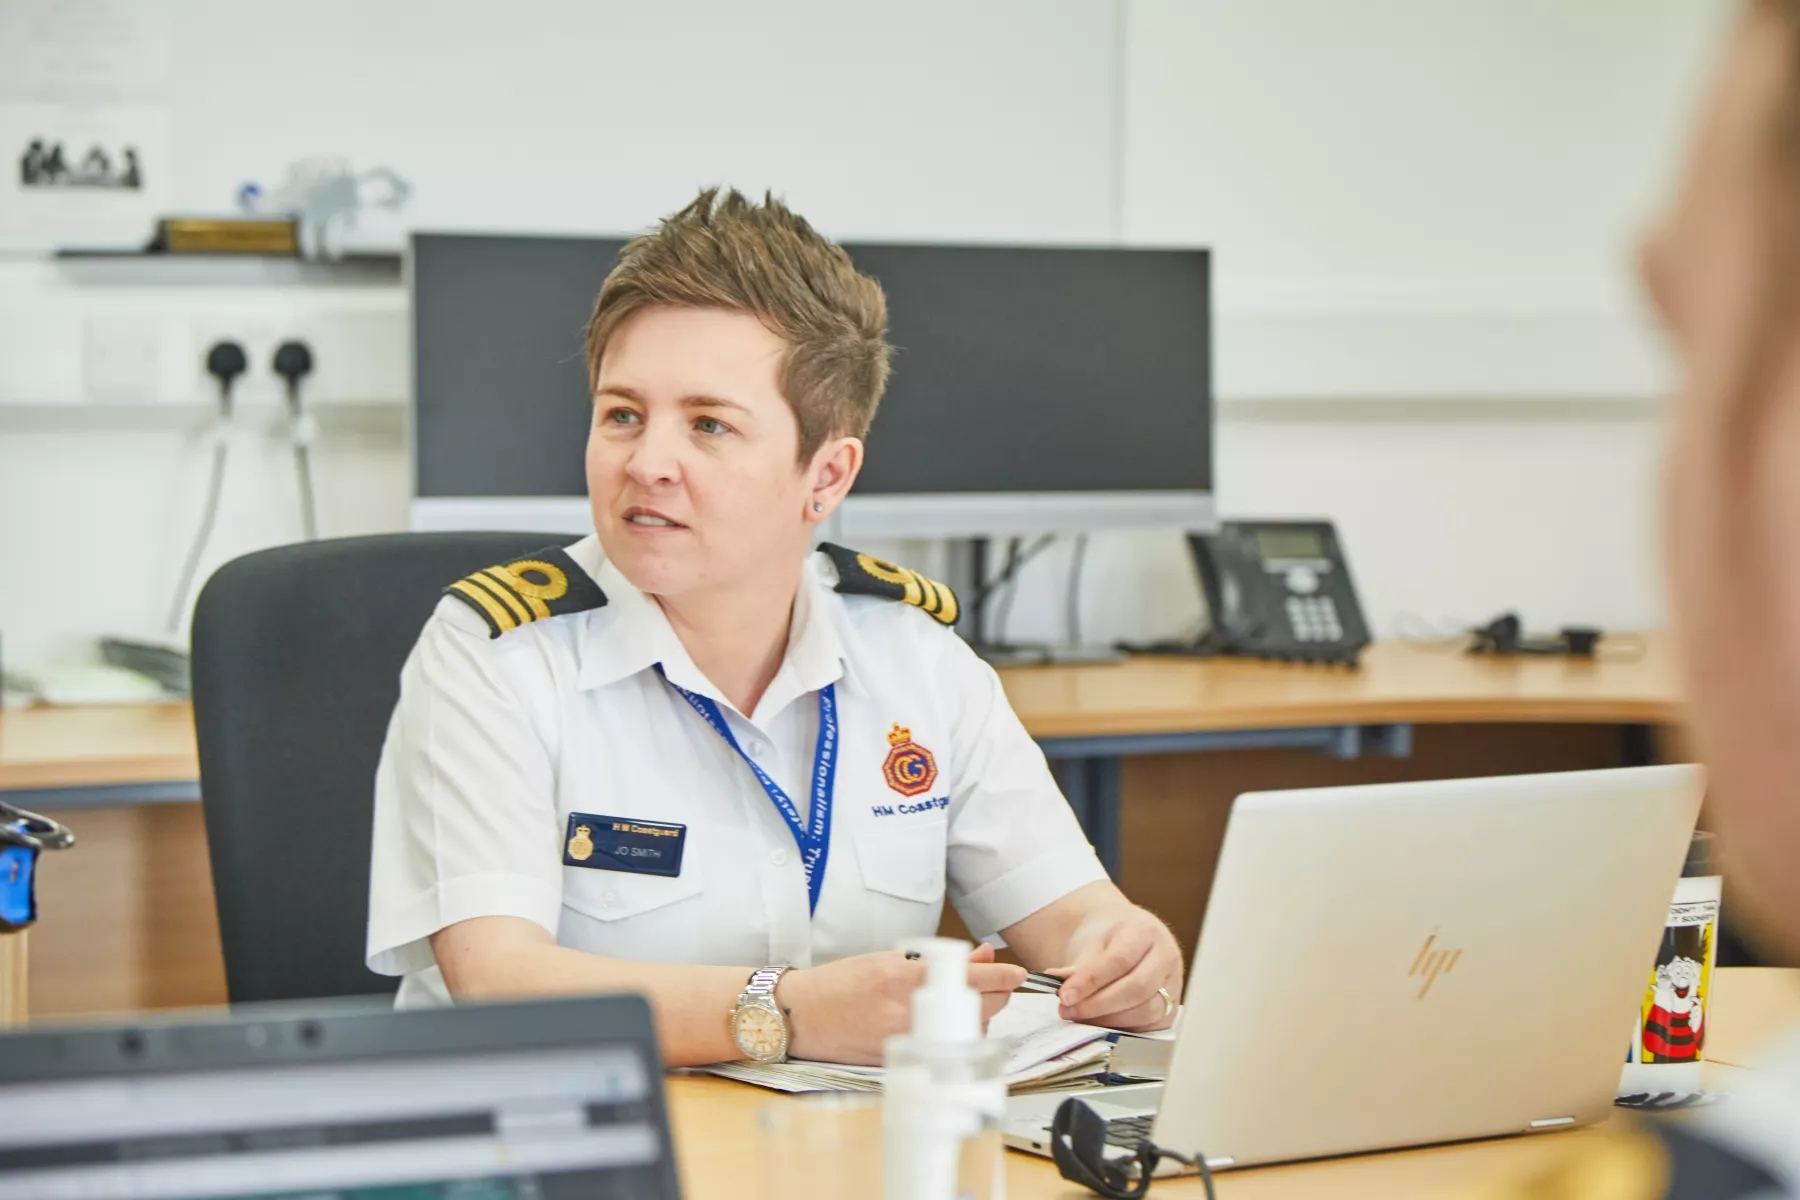 Jolene in white shirt HM Coastguard uniform in office looking off camera to right